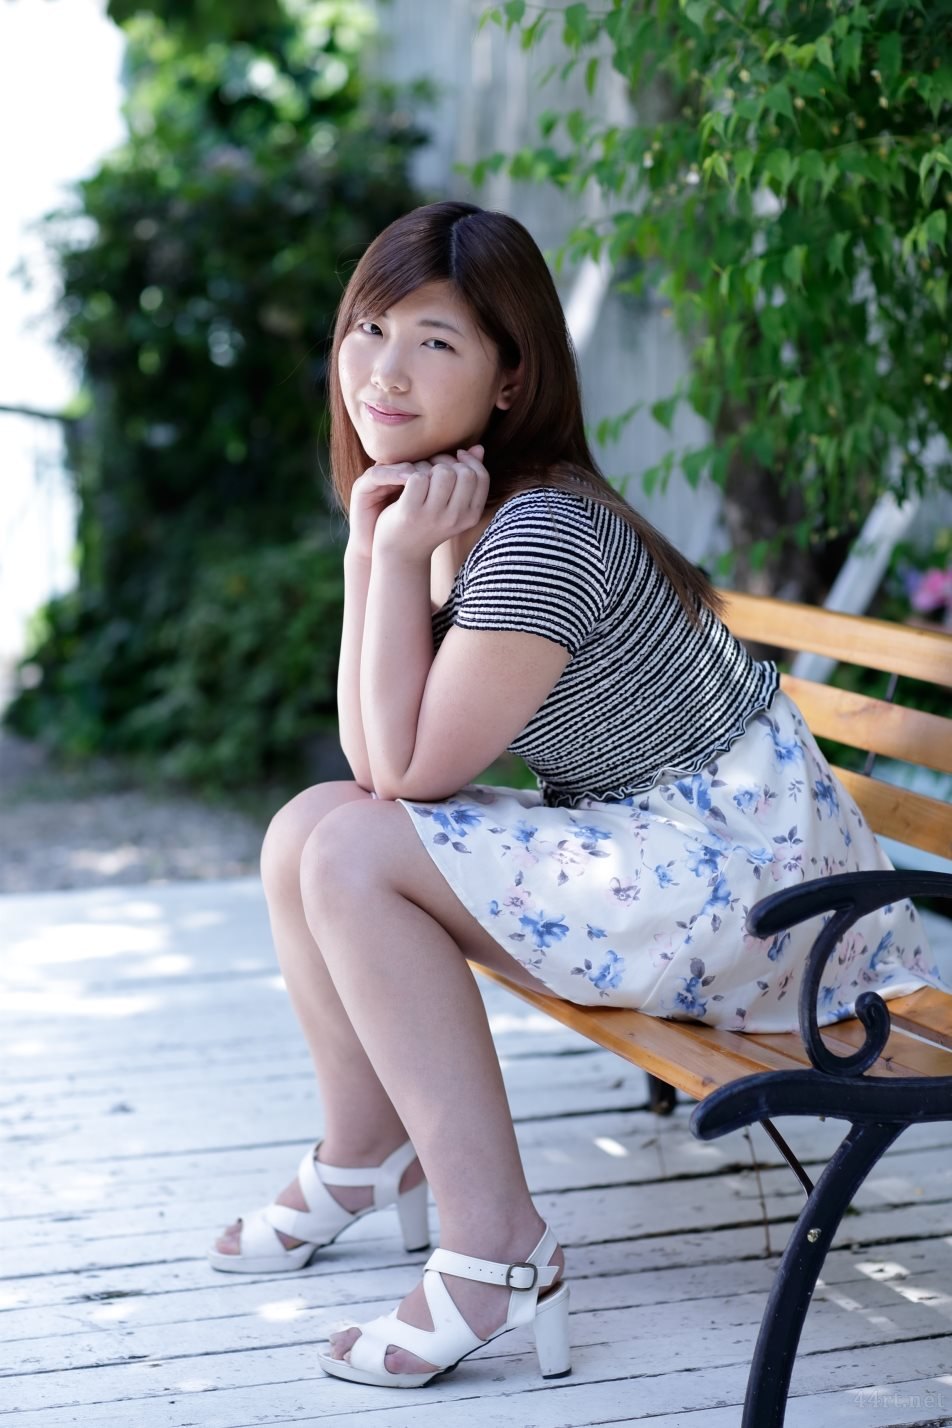 Japanese pure beauty Kuroda Mio outdoor private pictures -----59**